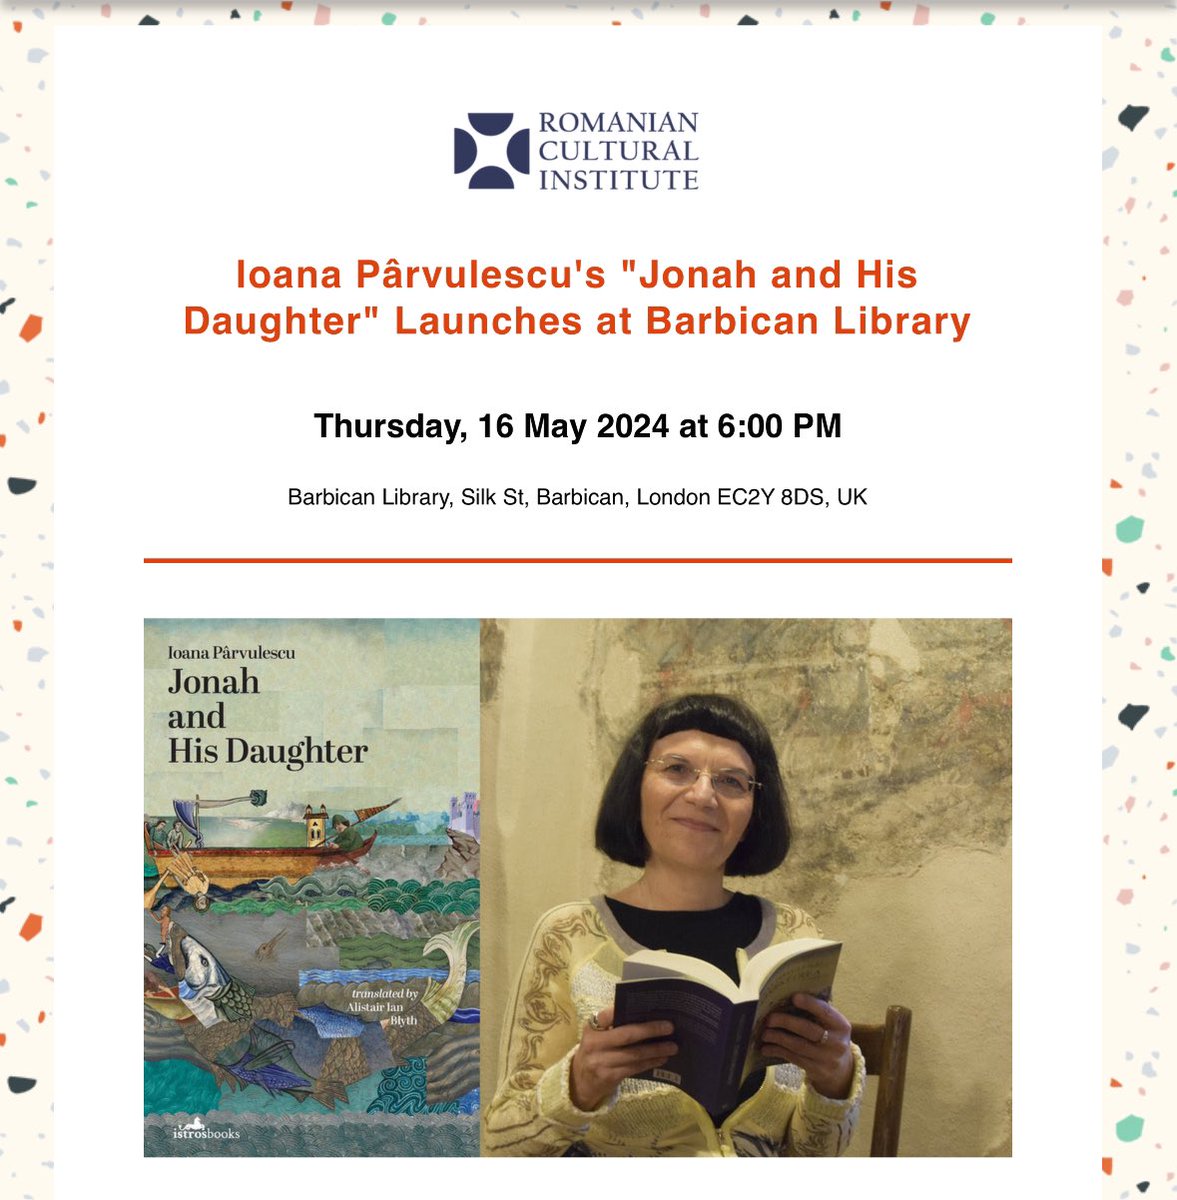 Join @Istros_books for an unforgettable evening on Thurs 16th @barbicanlib A journey into the most profound depths of literature, its sources of inspiration and the strive to present one's work to increasingly larger audiences through translation. rcilondon.co.uk/so/abOzYkZIV/c…